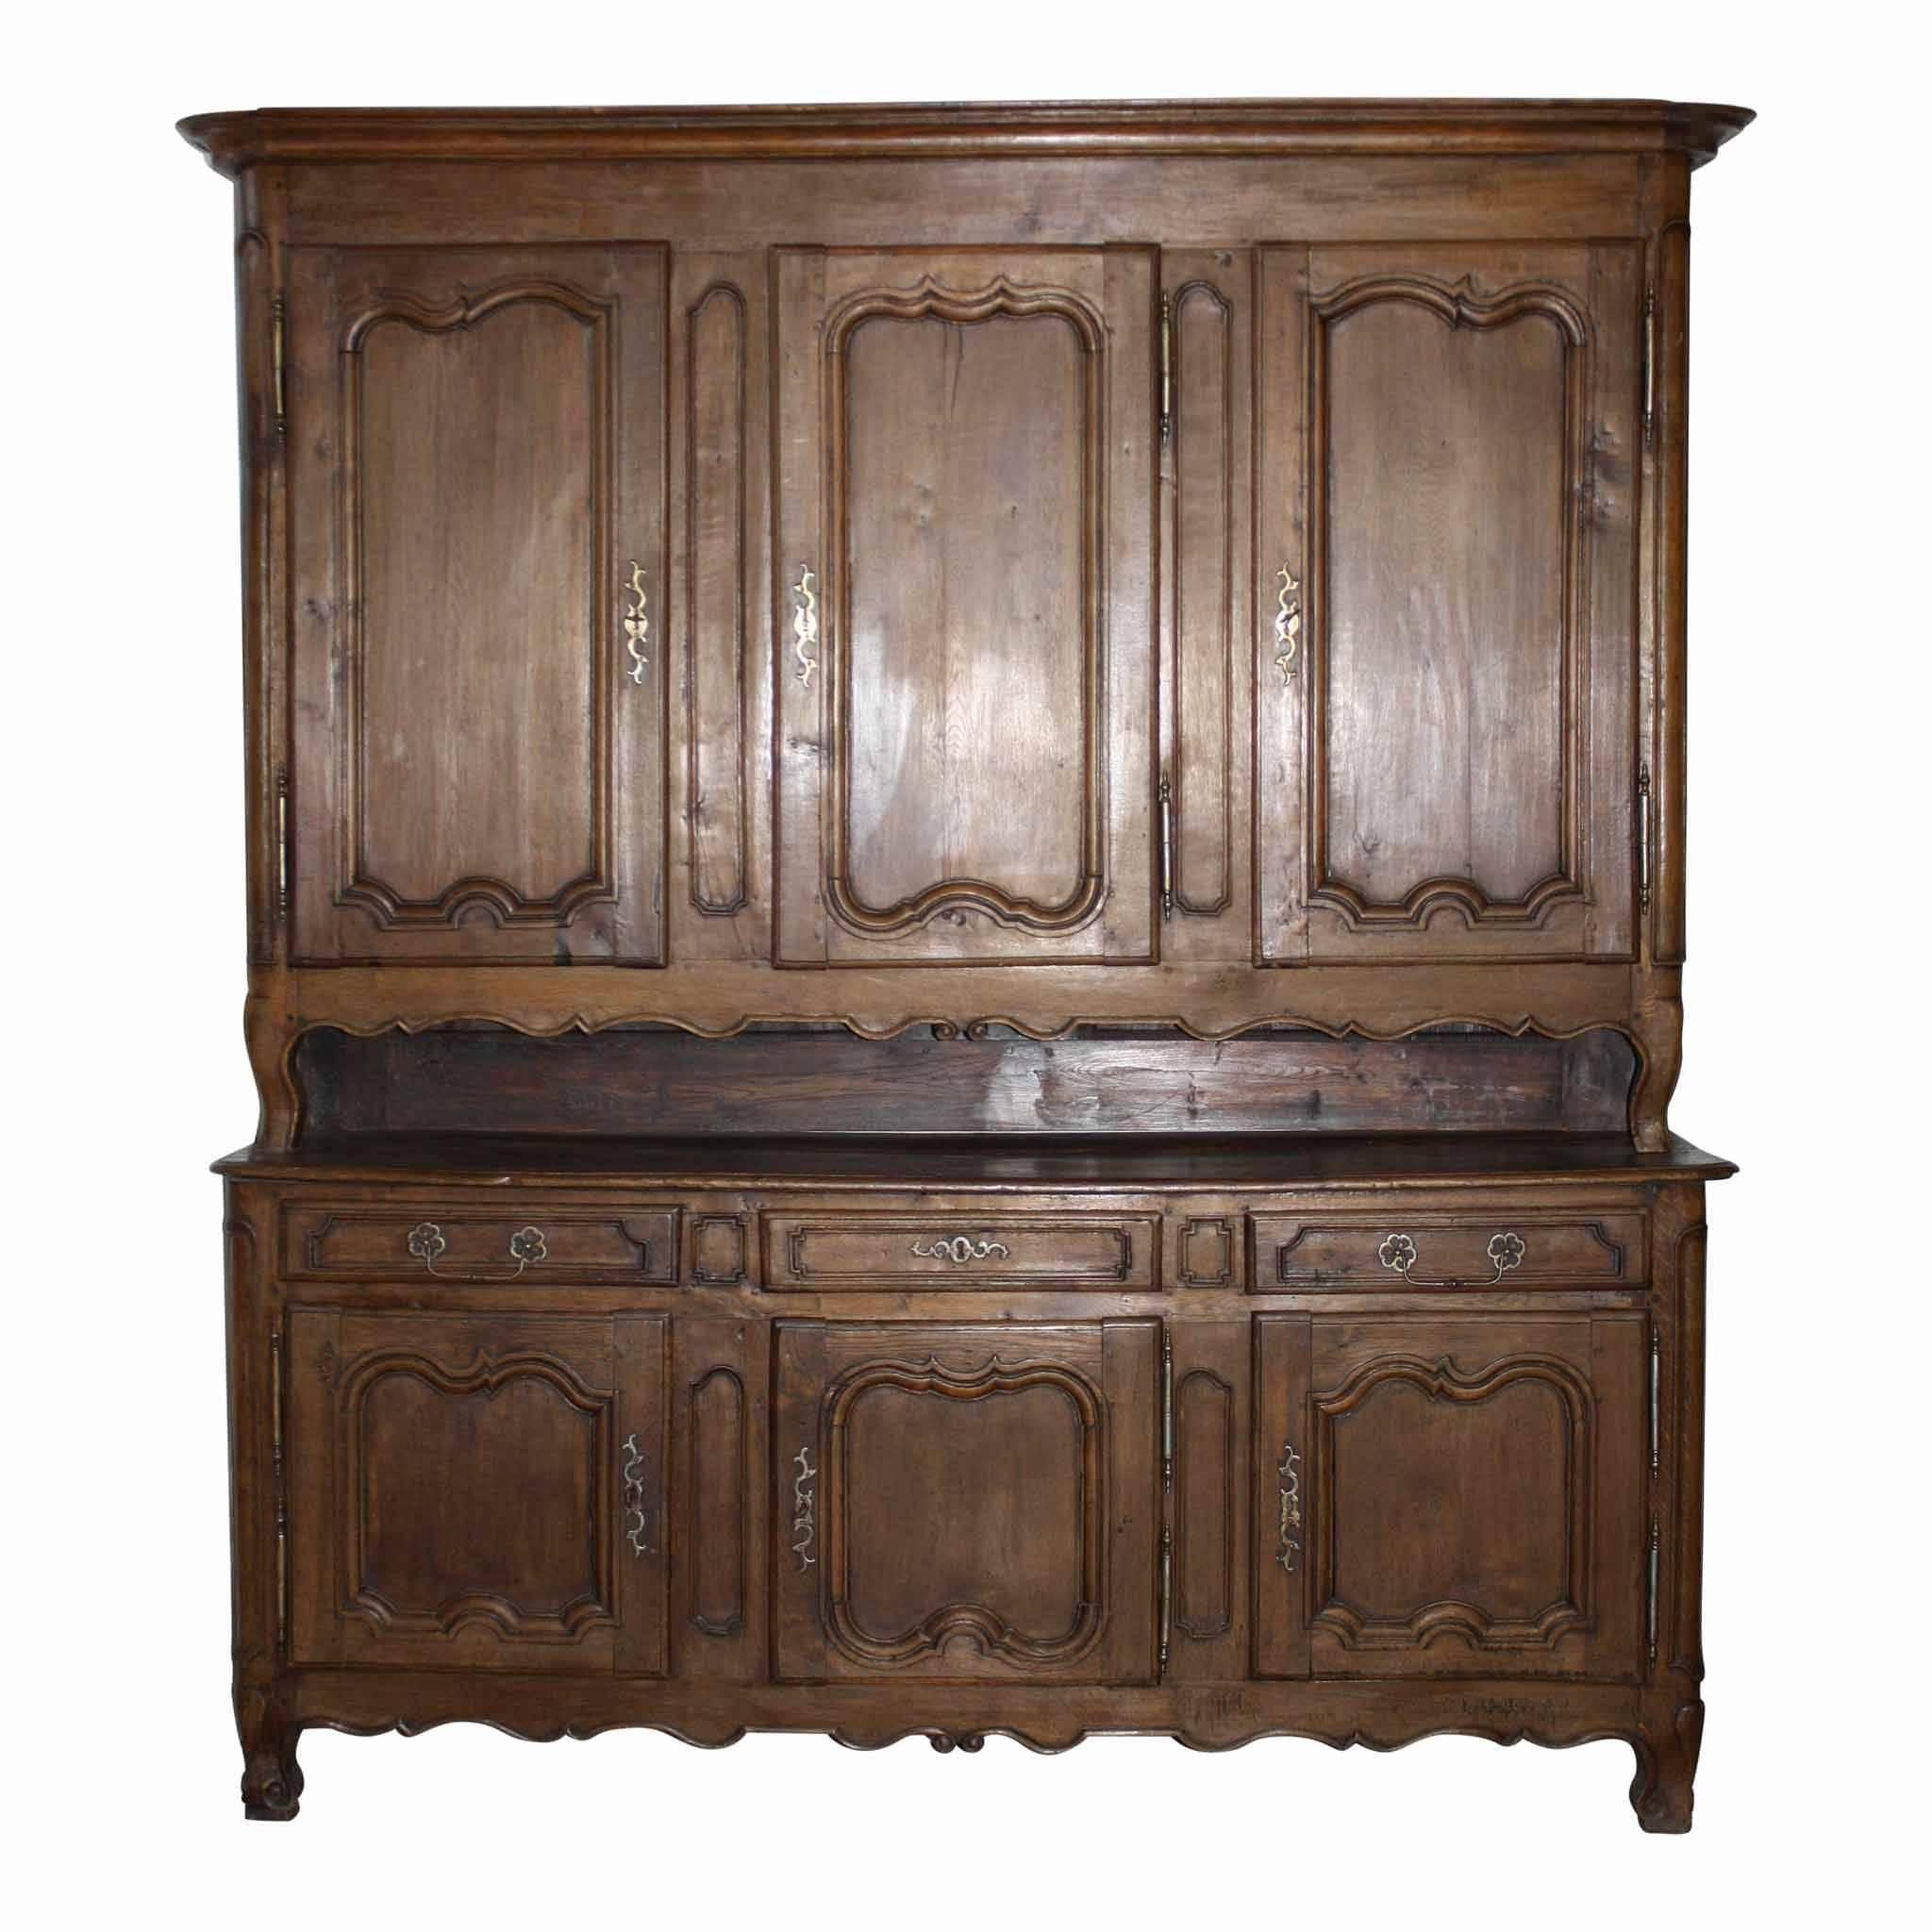 French Country Oak Deux Corps Cabinet, circa 1800